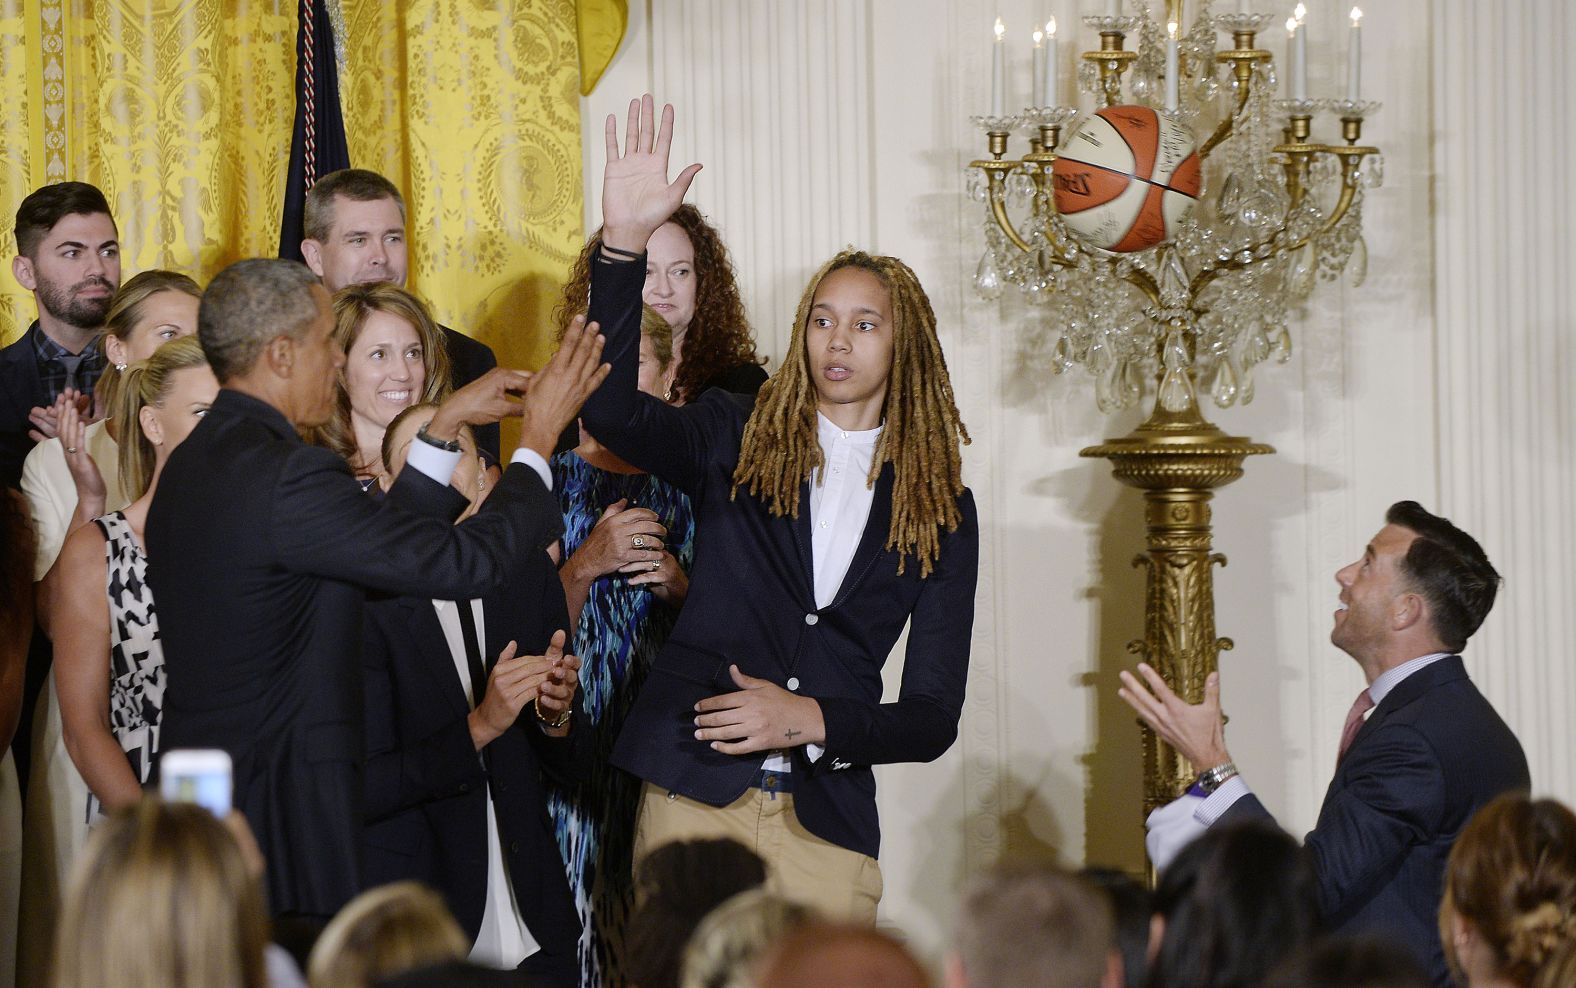 Griner high-fives Obama as the Mercury visited the White House in 2015.